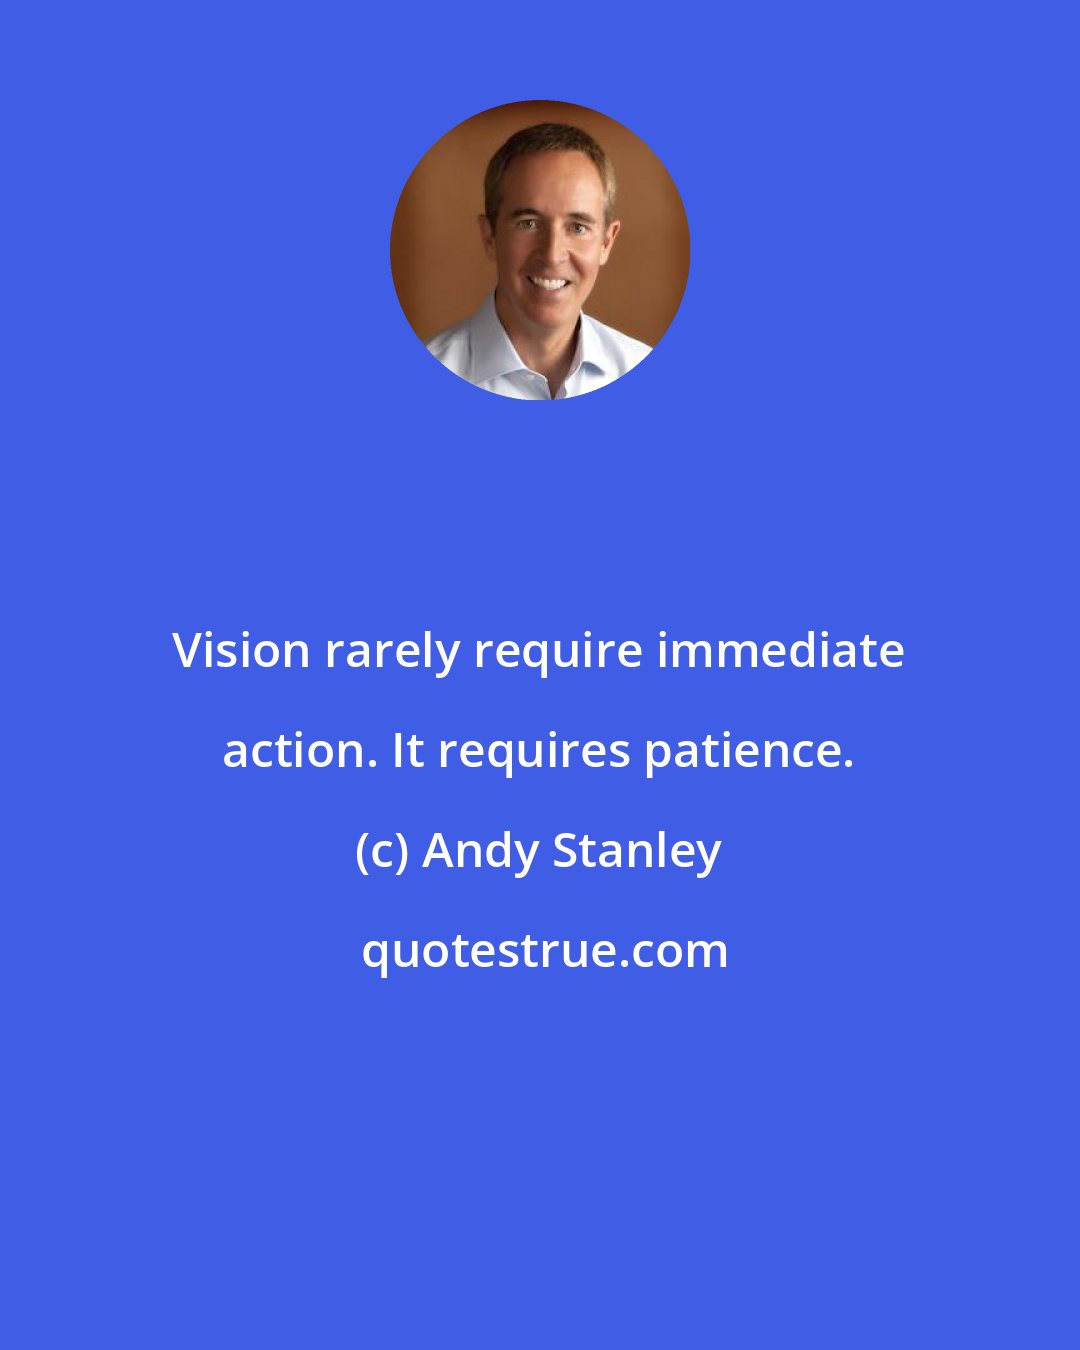 Andy Stanley: Vision rarely require immediate action. It requires patience.